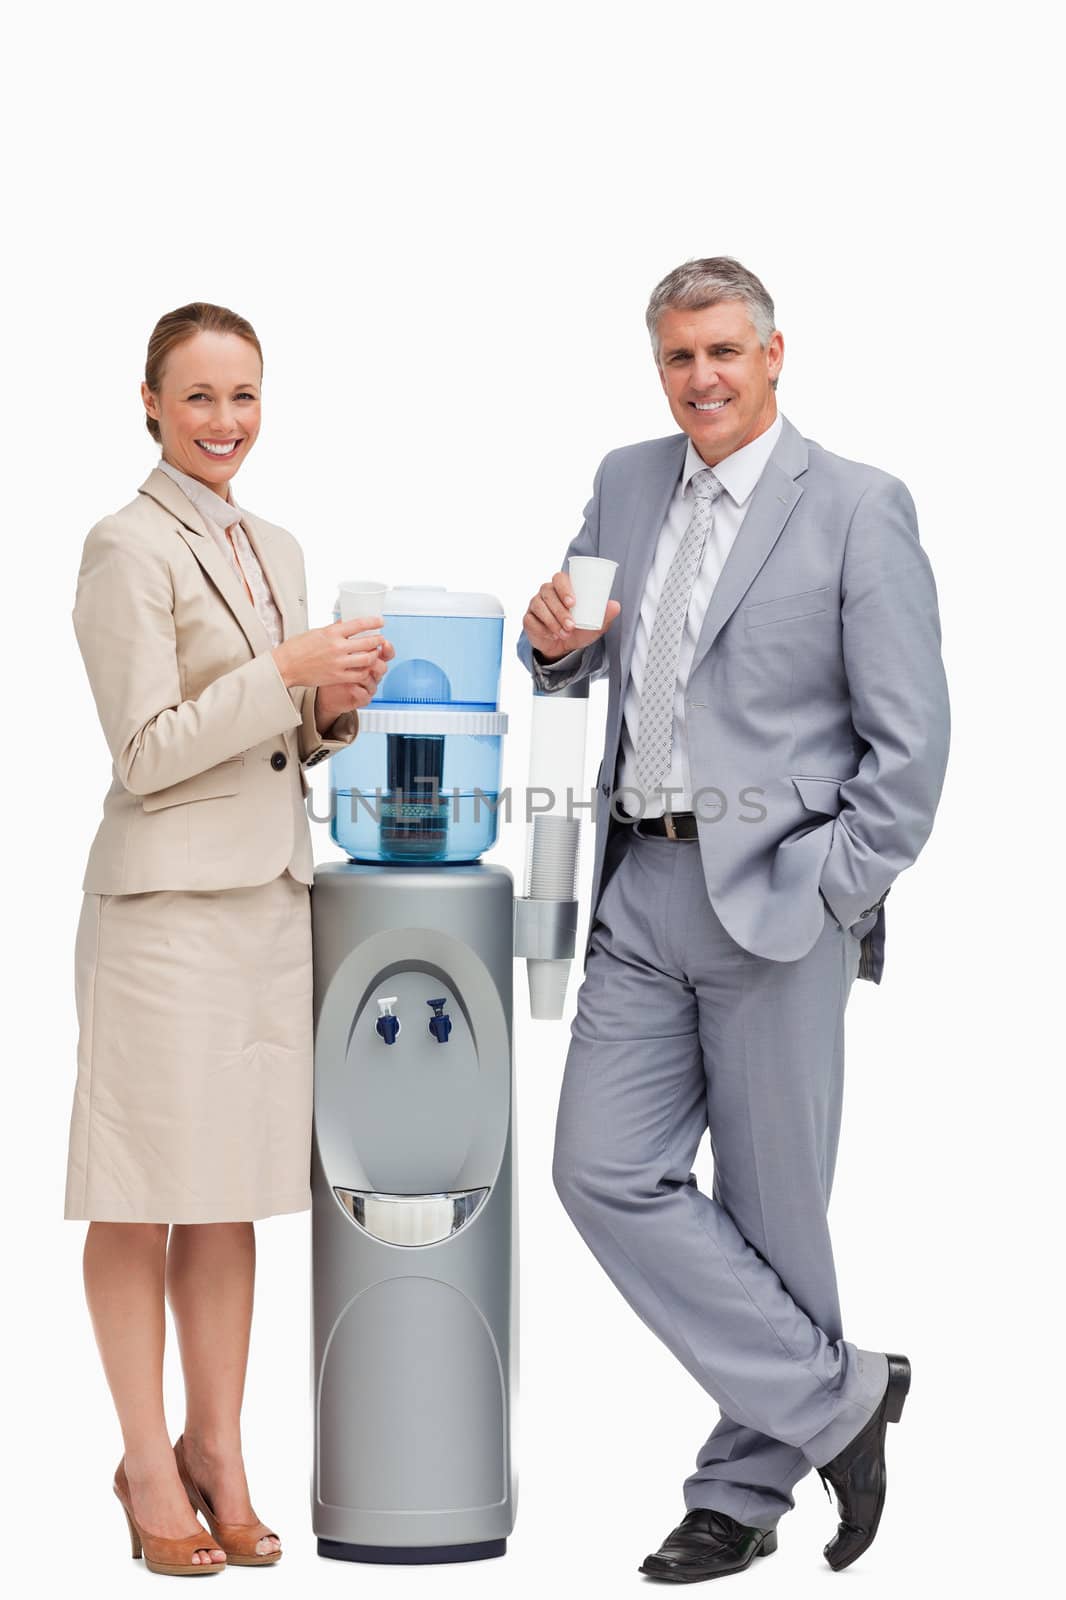 Portrait of business people smiling next to the water dispenser against white background